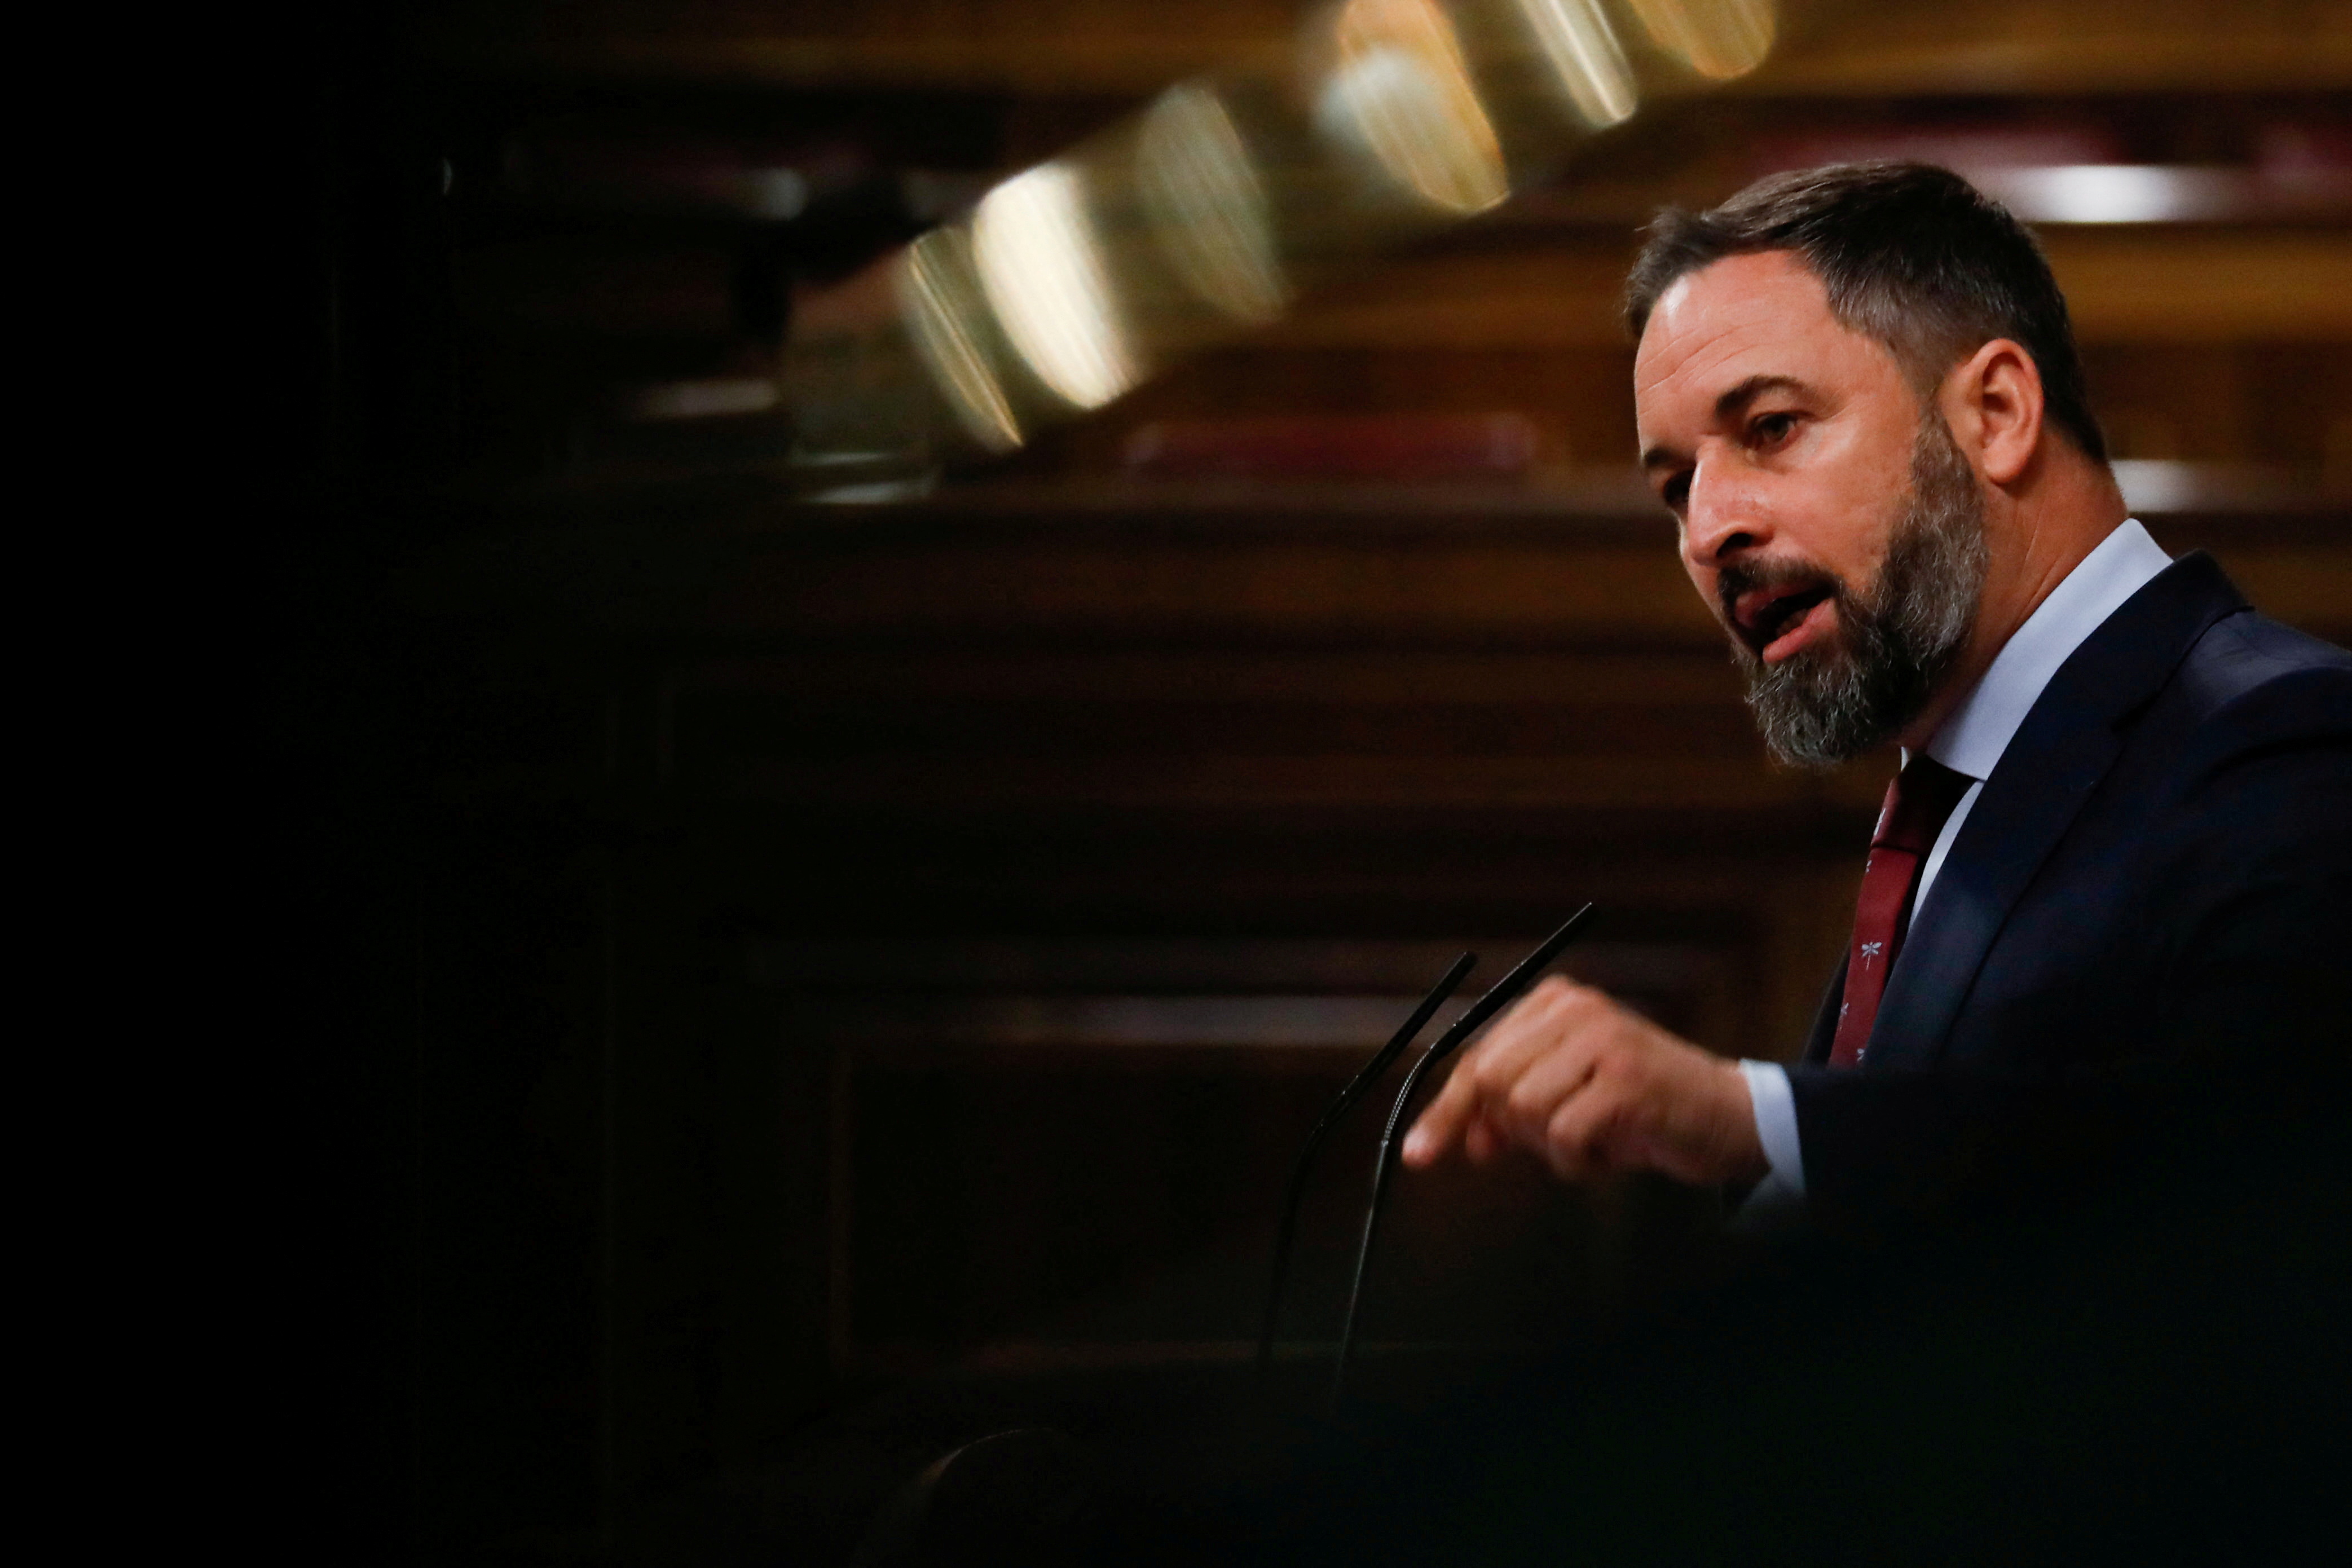 Santiago Abascal, leader of far-right party Vox, speaks during a session at Parliament in Madrid